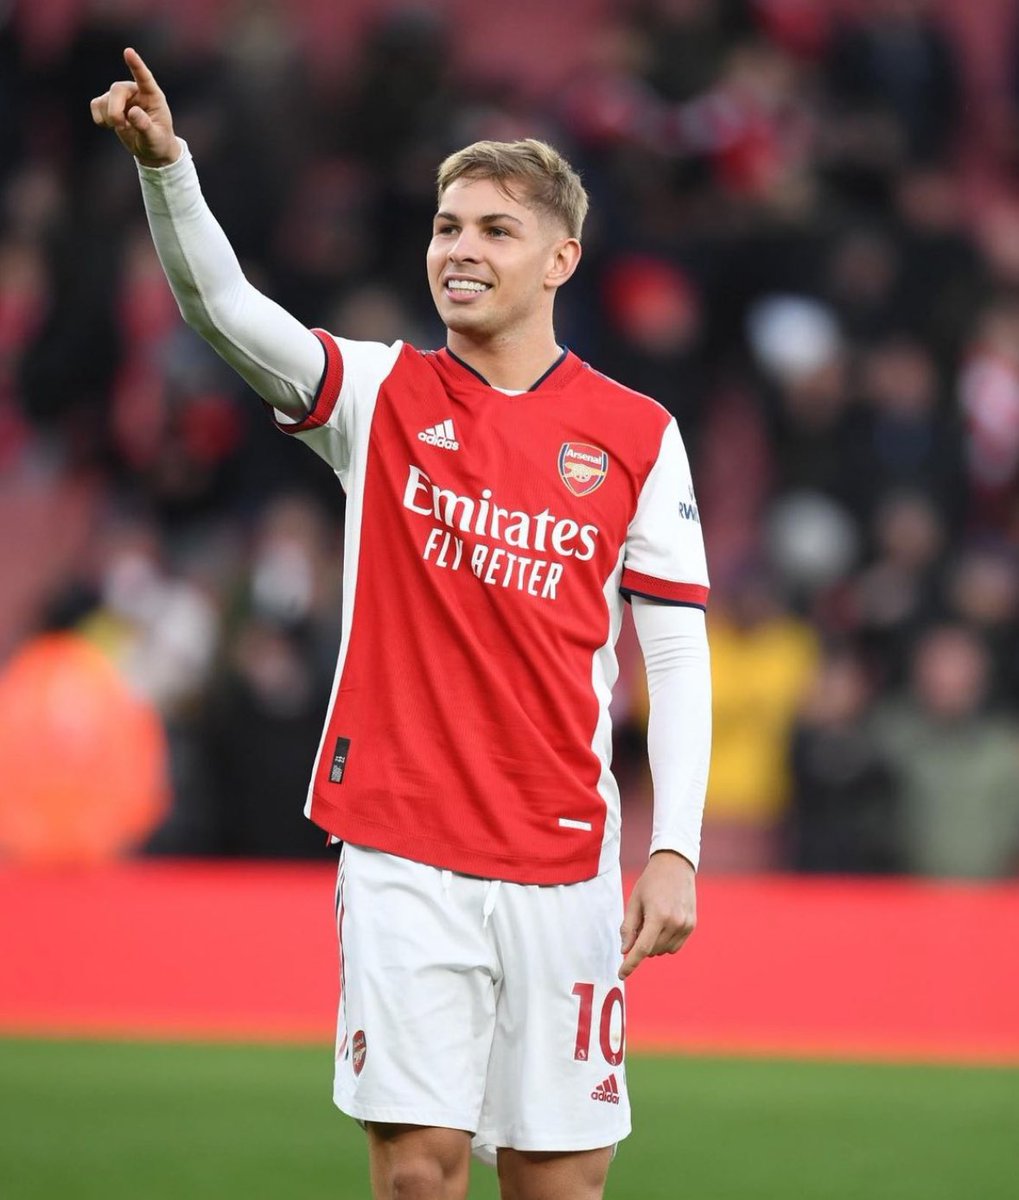 🔴⚪️ Arteta: “I love him Smith-Rowe as a player. It’s a joy to watch him”. “He can help with all his skills. He’s a joy to watch, he helped us a lot to win the game also today”.